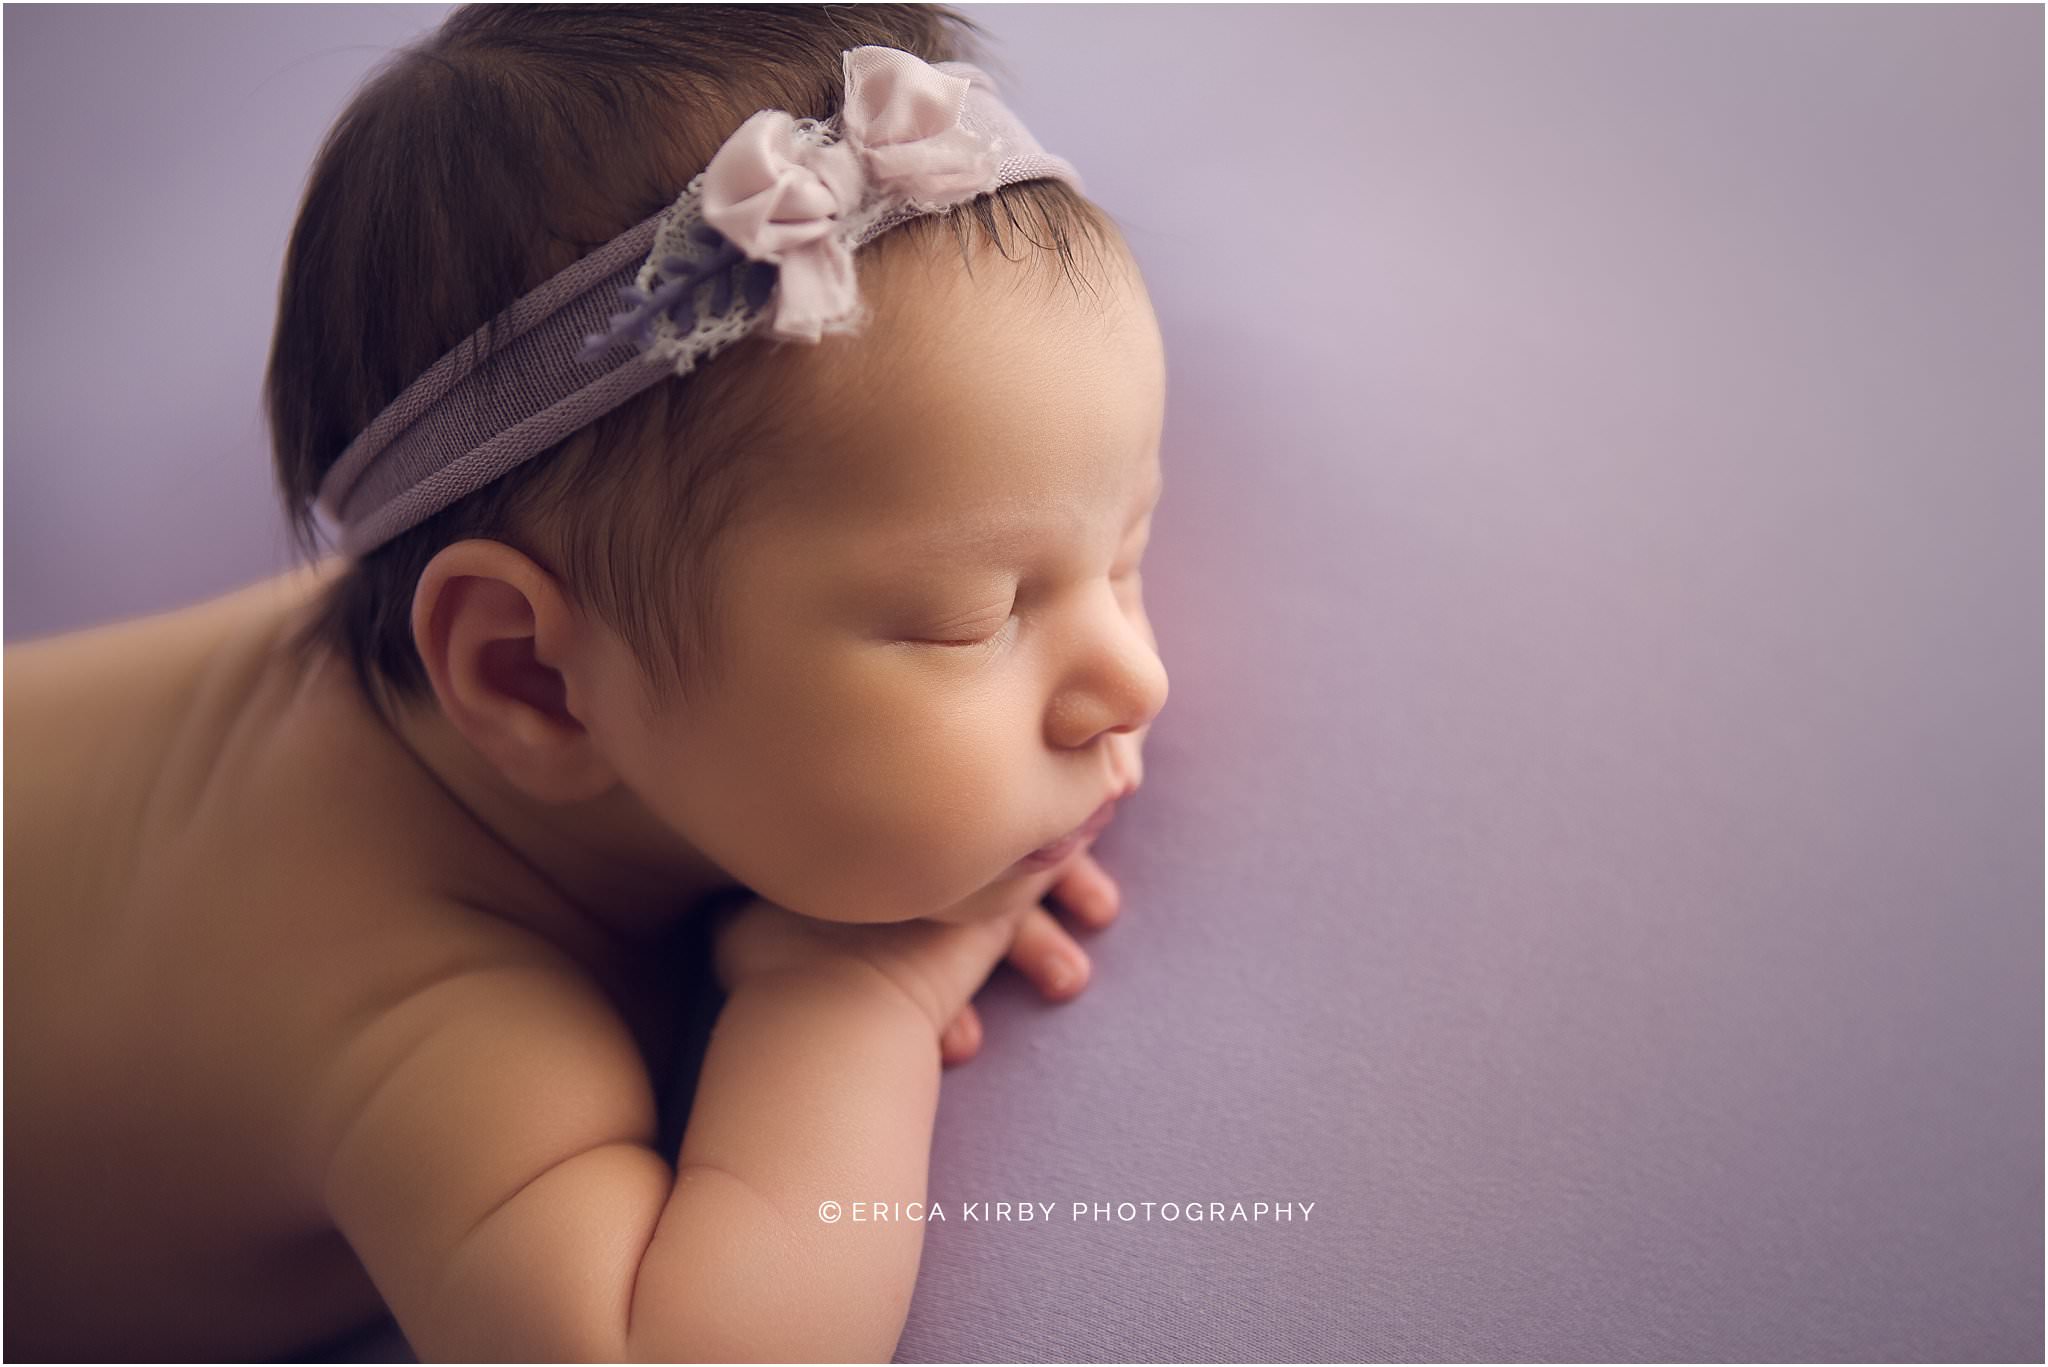 Studio Newborn Session Northwest Arkansas - baby girl newborn session with soft colors classic posing in studio - erica kirby photography